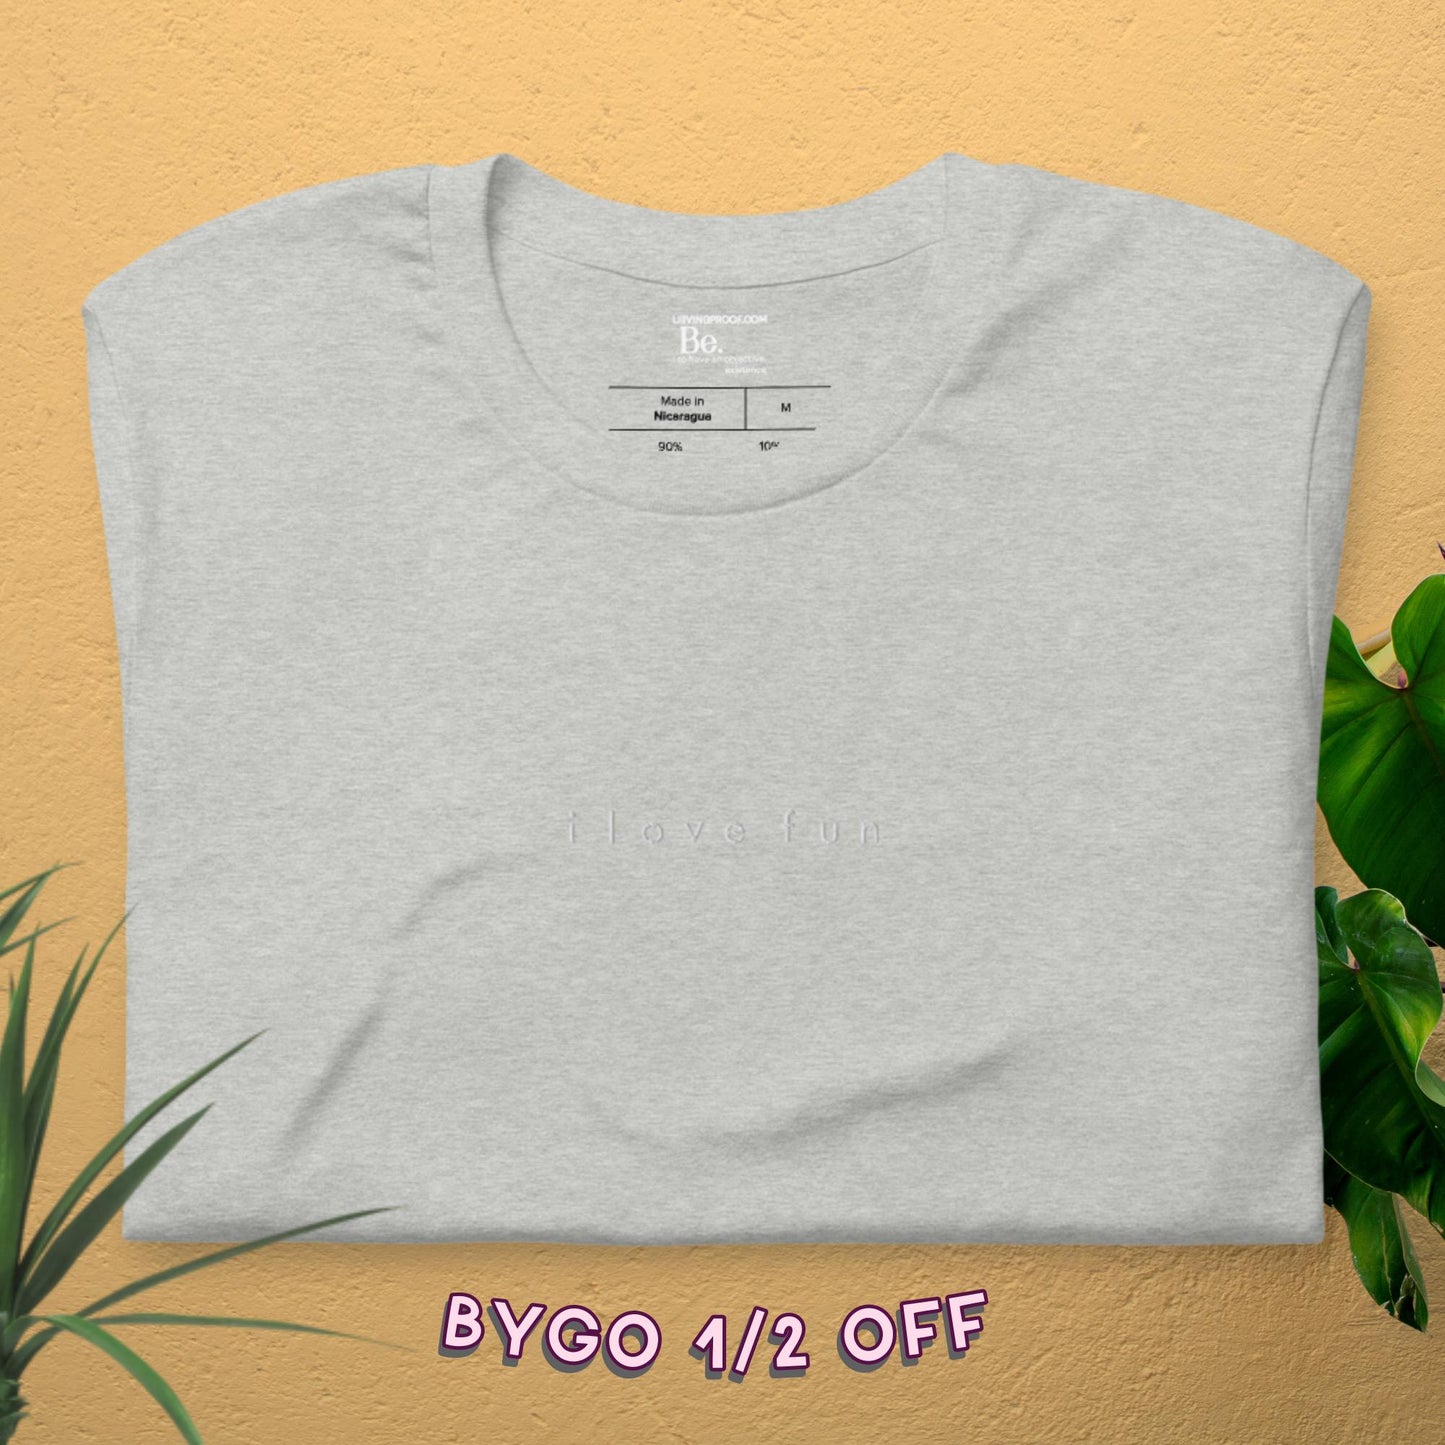 Embroidered T-Shirt - "i love fun"